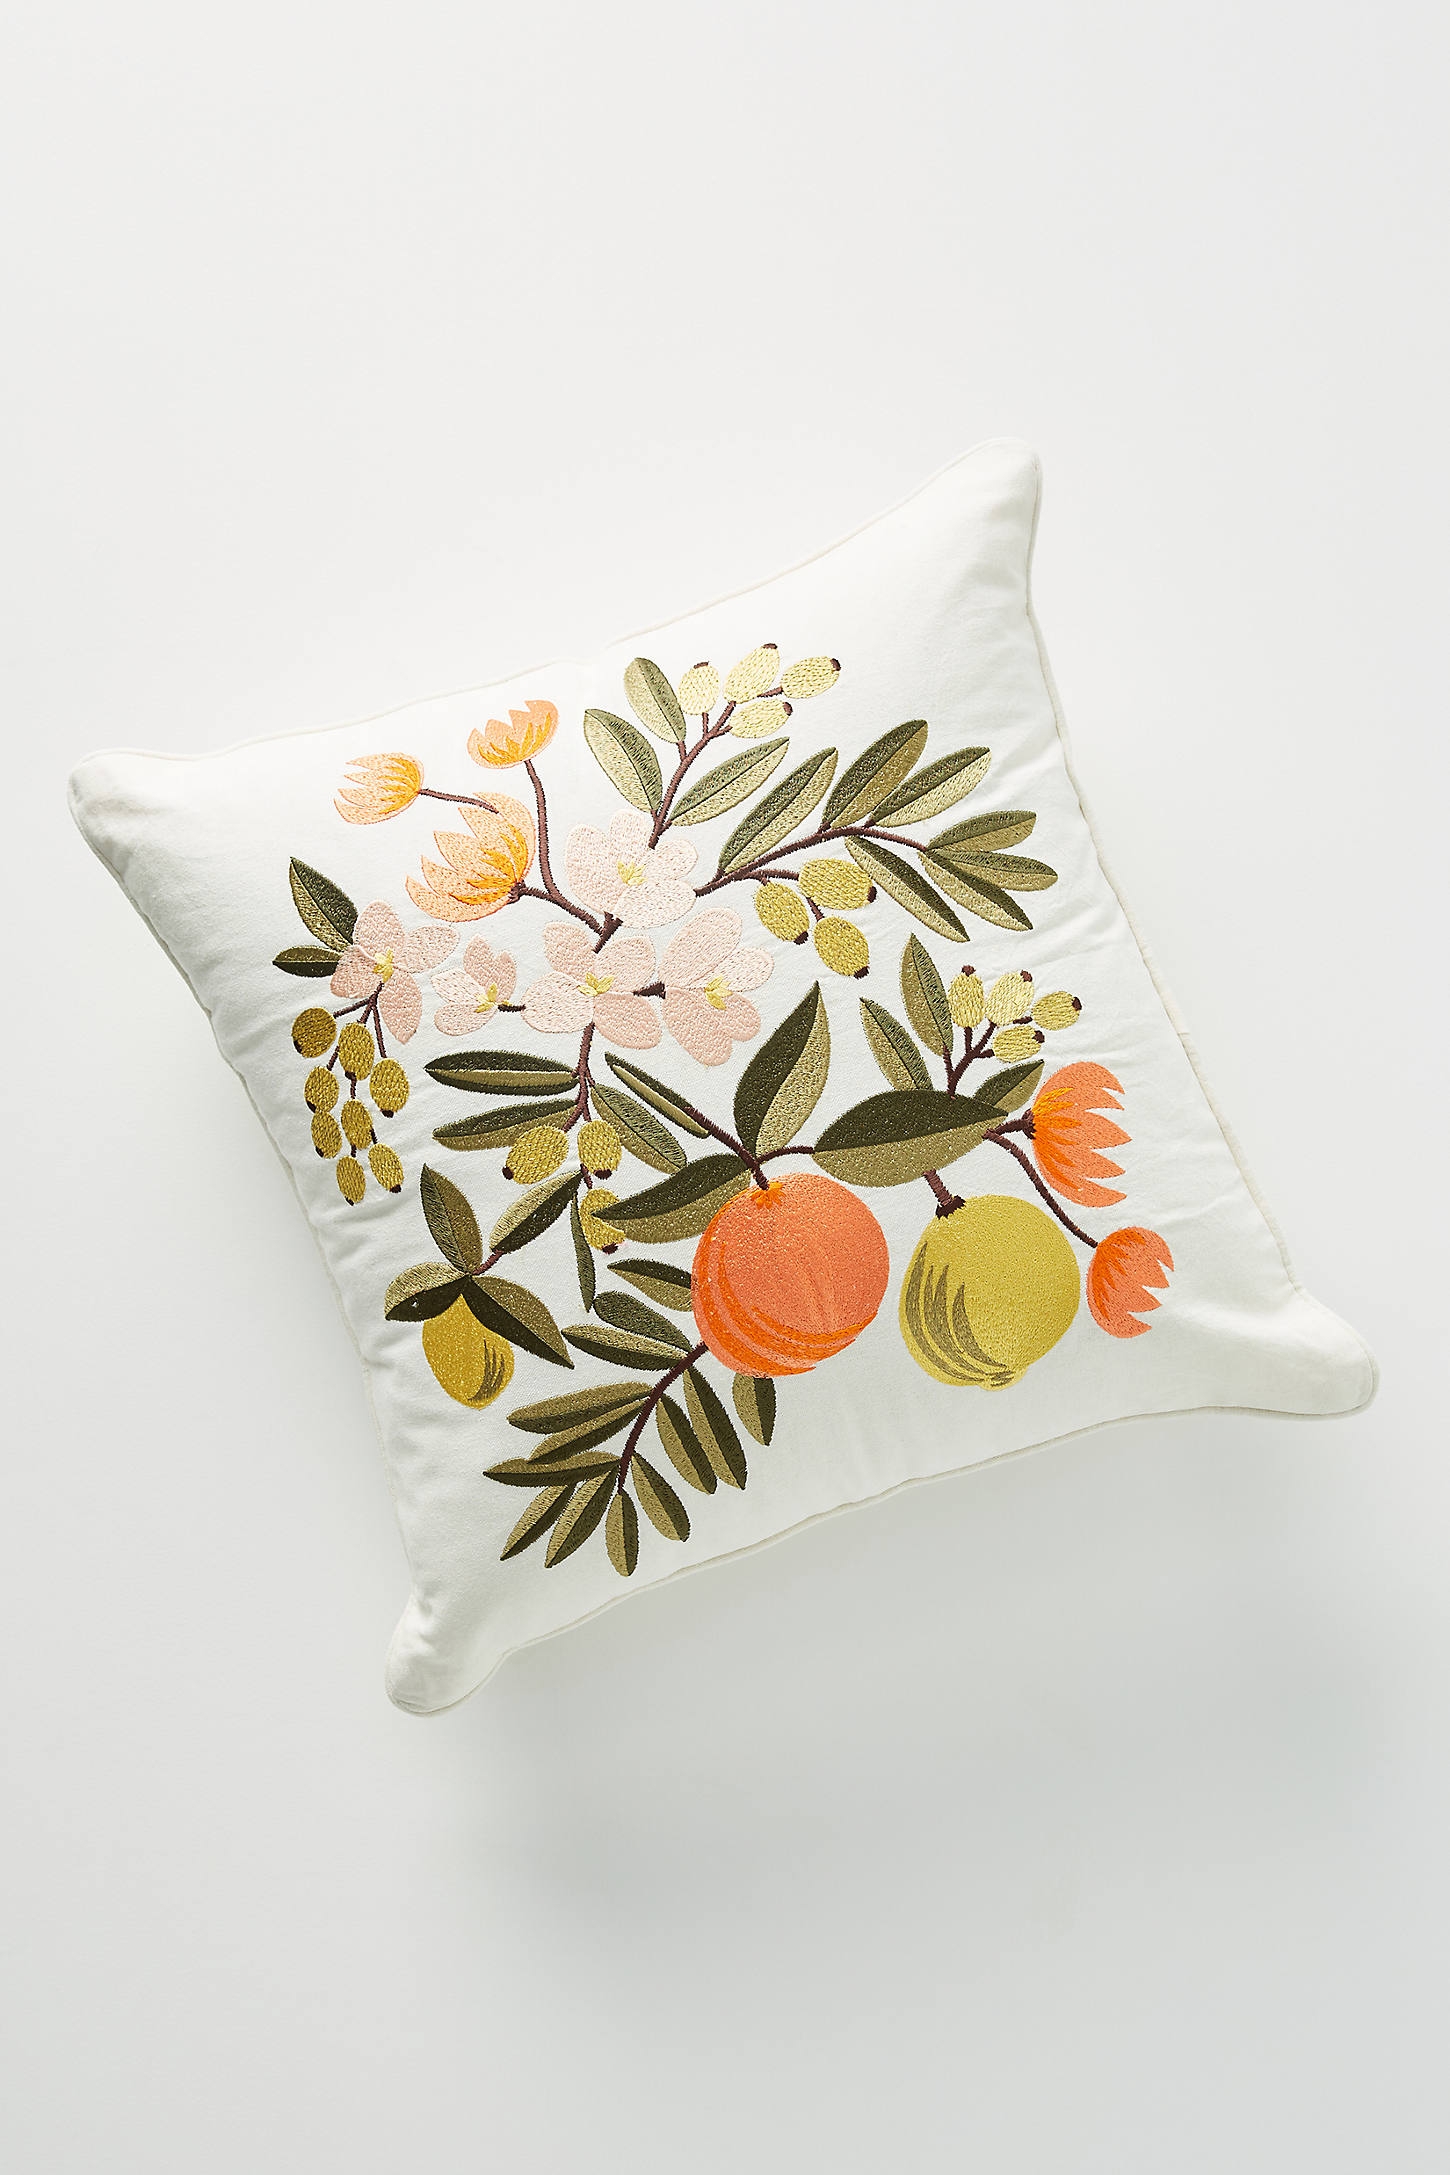 Rifle Paper Co. x Loloi Citrus Floral Embroidered Pillow - Image 0